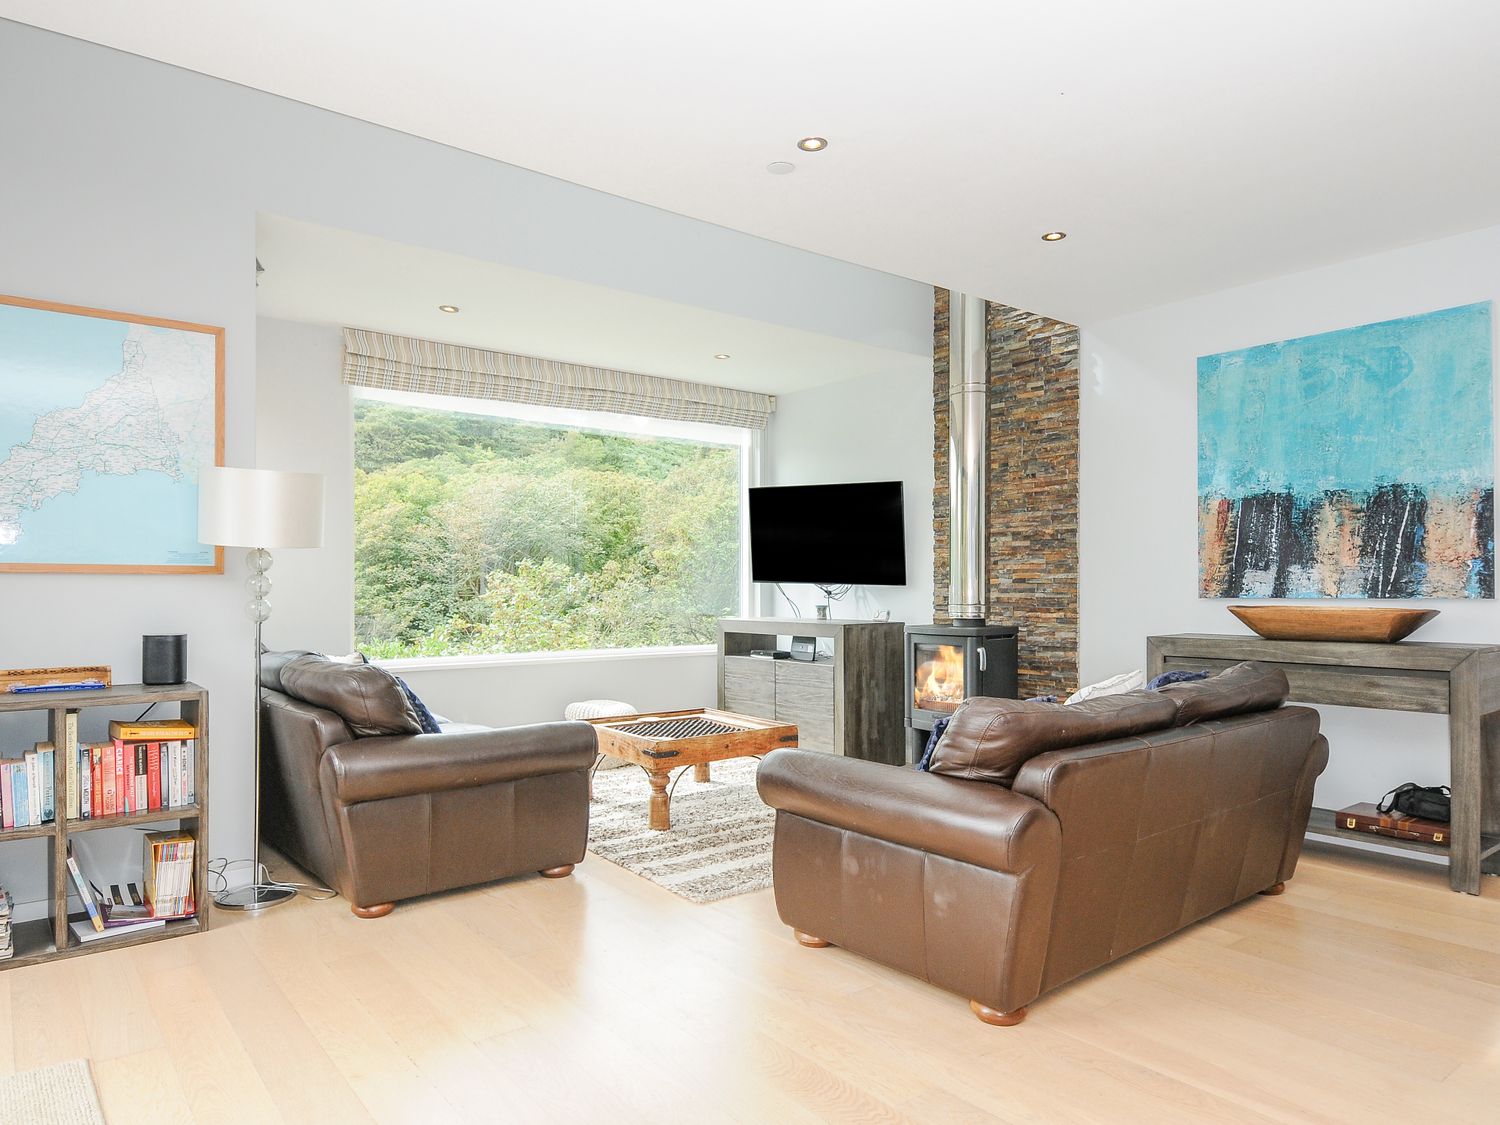 9 Cedars in St Agnes, Cornwall. Hot tub. Open-plan living. Enclosed decking. Pet-friendly. Detached.